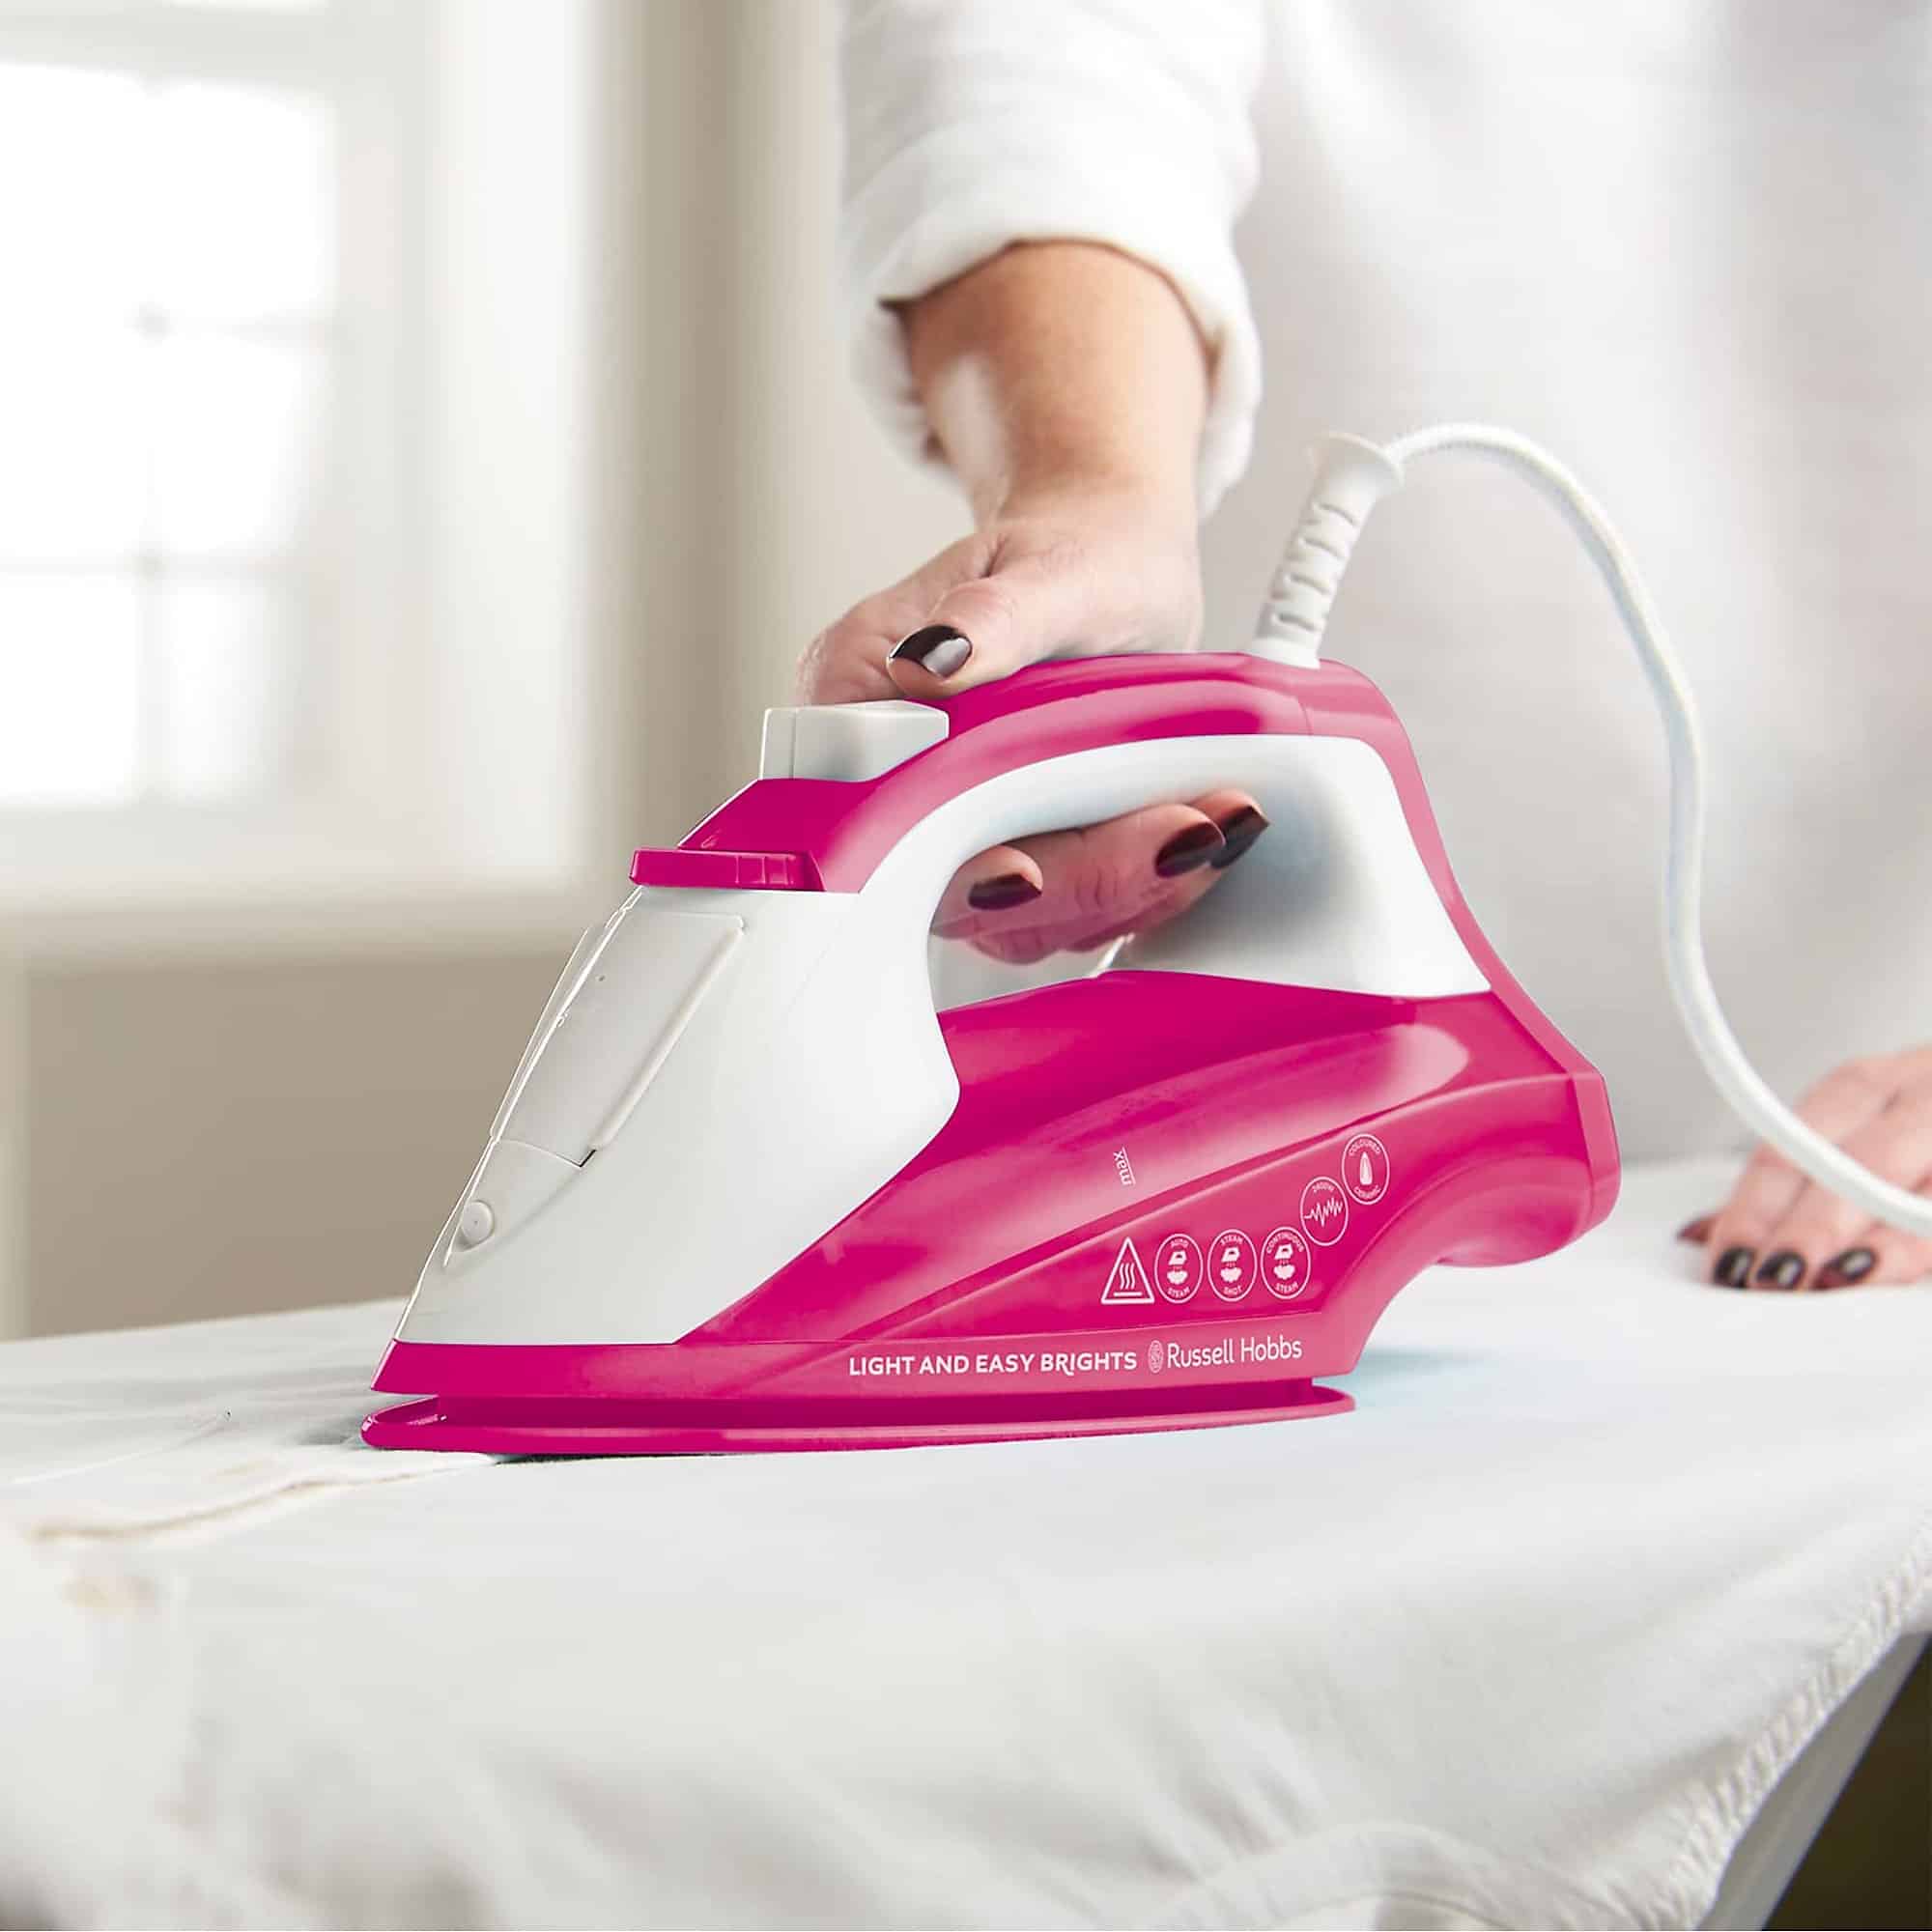 Russell Hobbs 26480 Light and Easy Brights Steam Iron 2400W, 0.24L Water Tank-0122